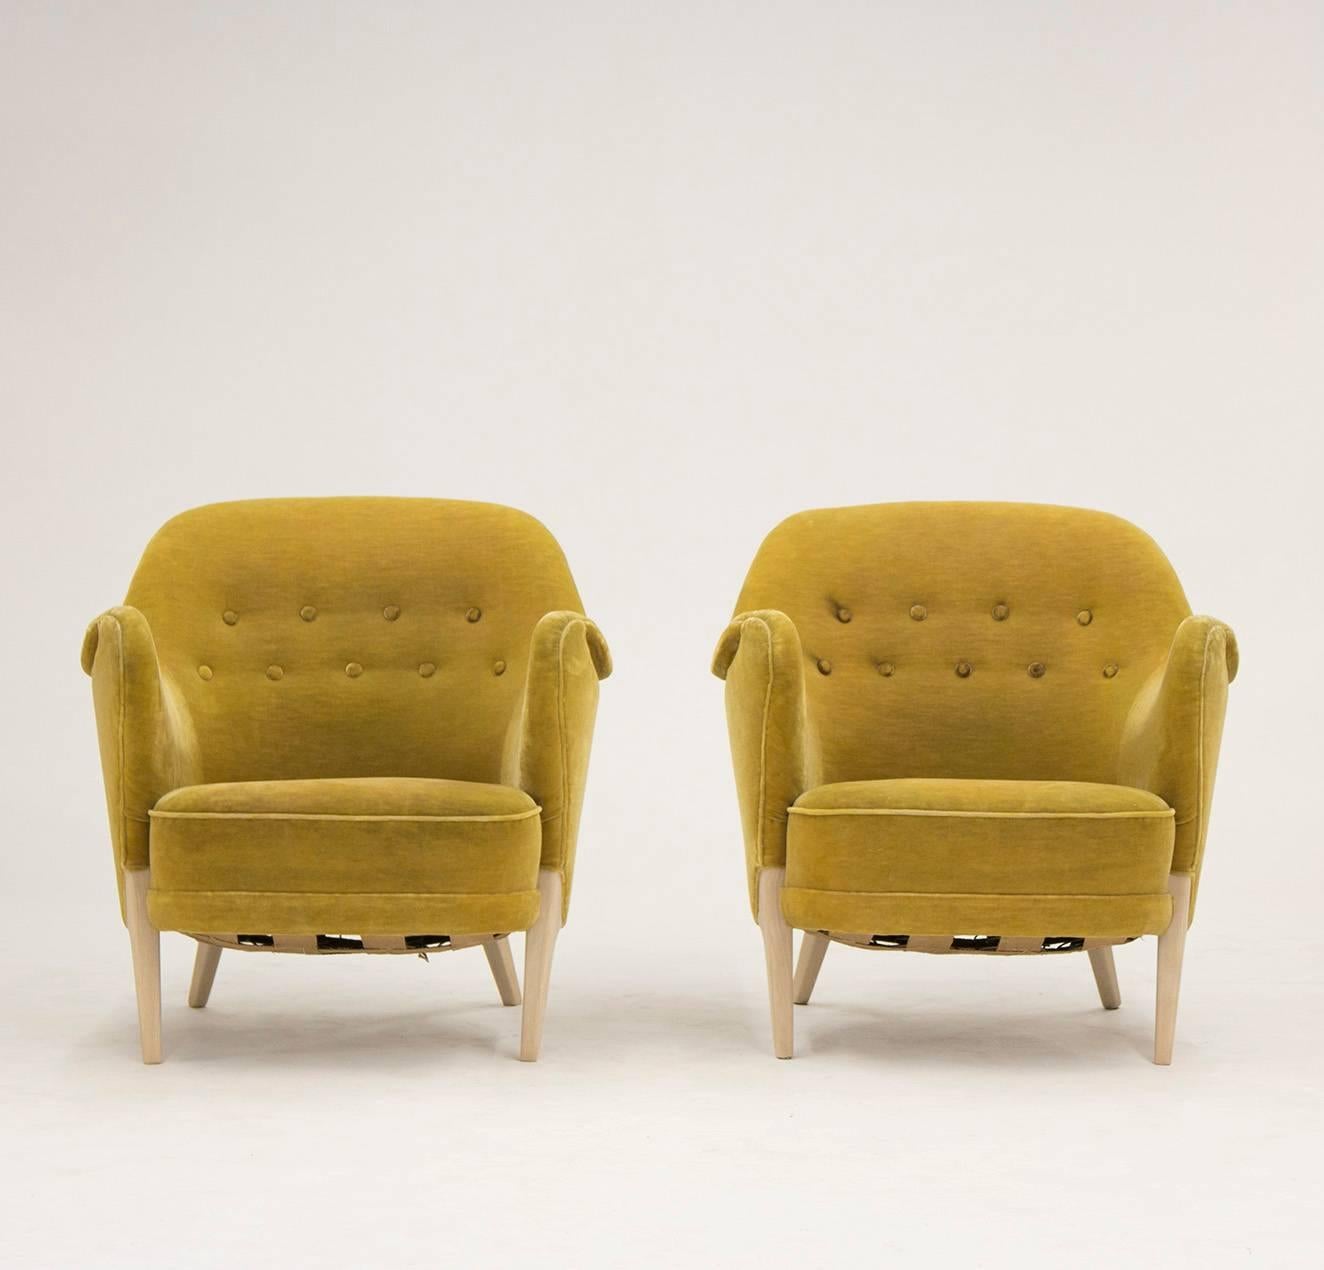 Pair of very rare lounge chairs by Arne Hovmand Olsen from the early 1950s. Awesome cheeky design with cool, angular legs and a luxurious extra seam running from under the armrests and up along the top. Original upholstery of a great color with some